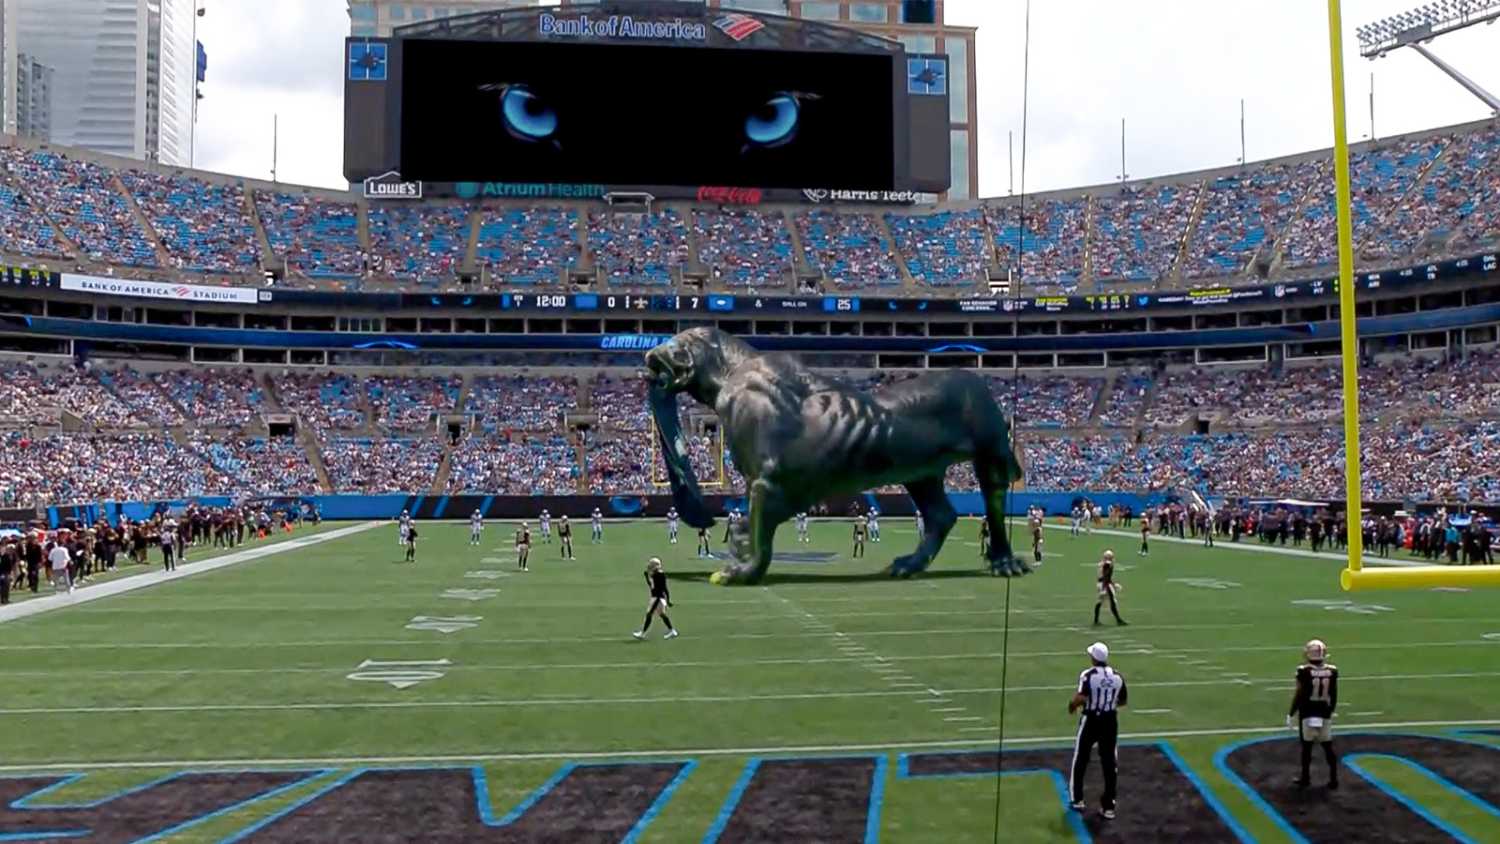 ‘The mixed reality Panther has become an important part of games for the Carolina Panthers’